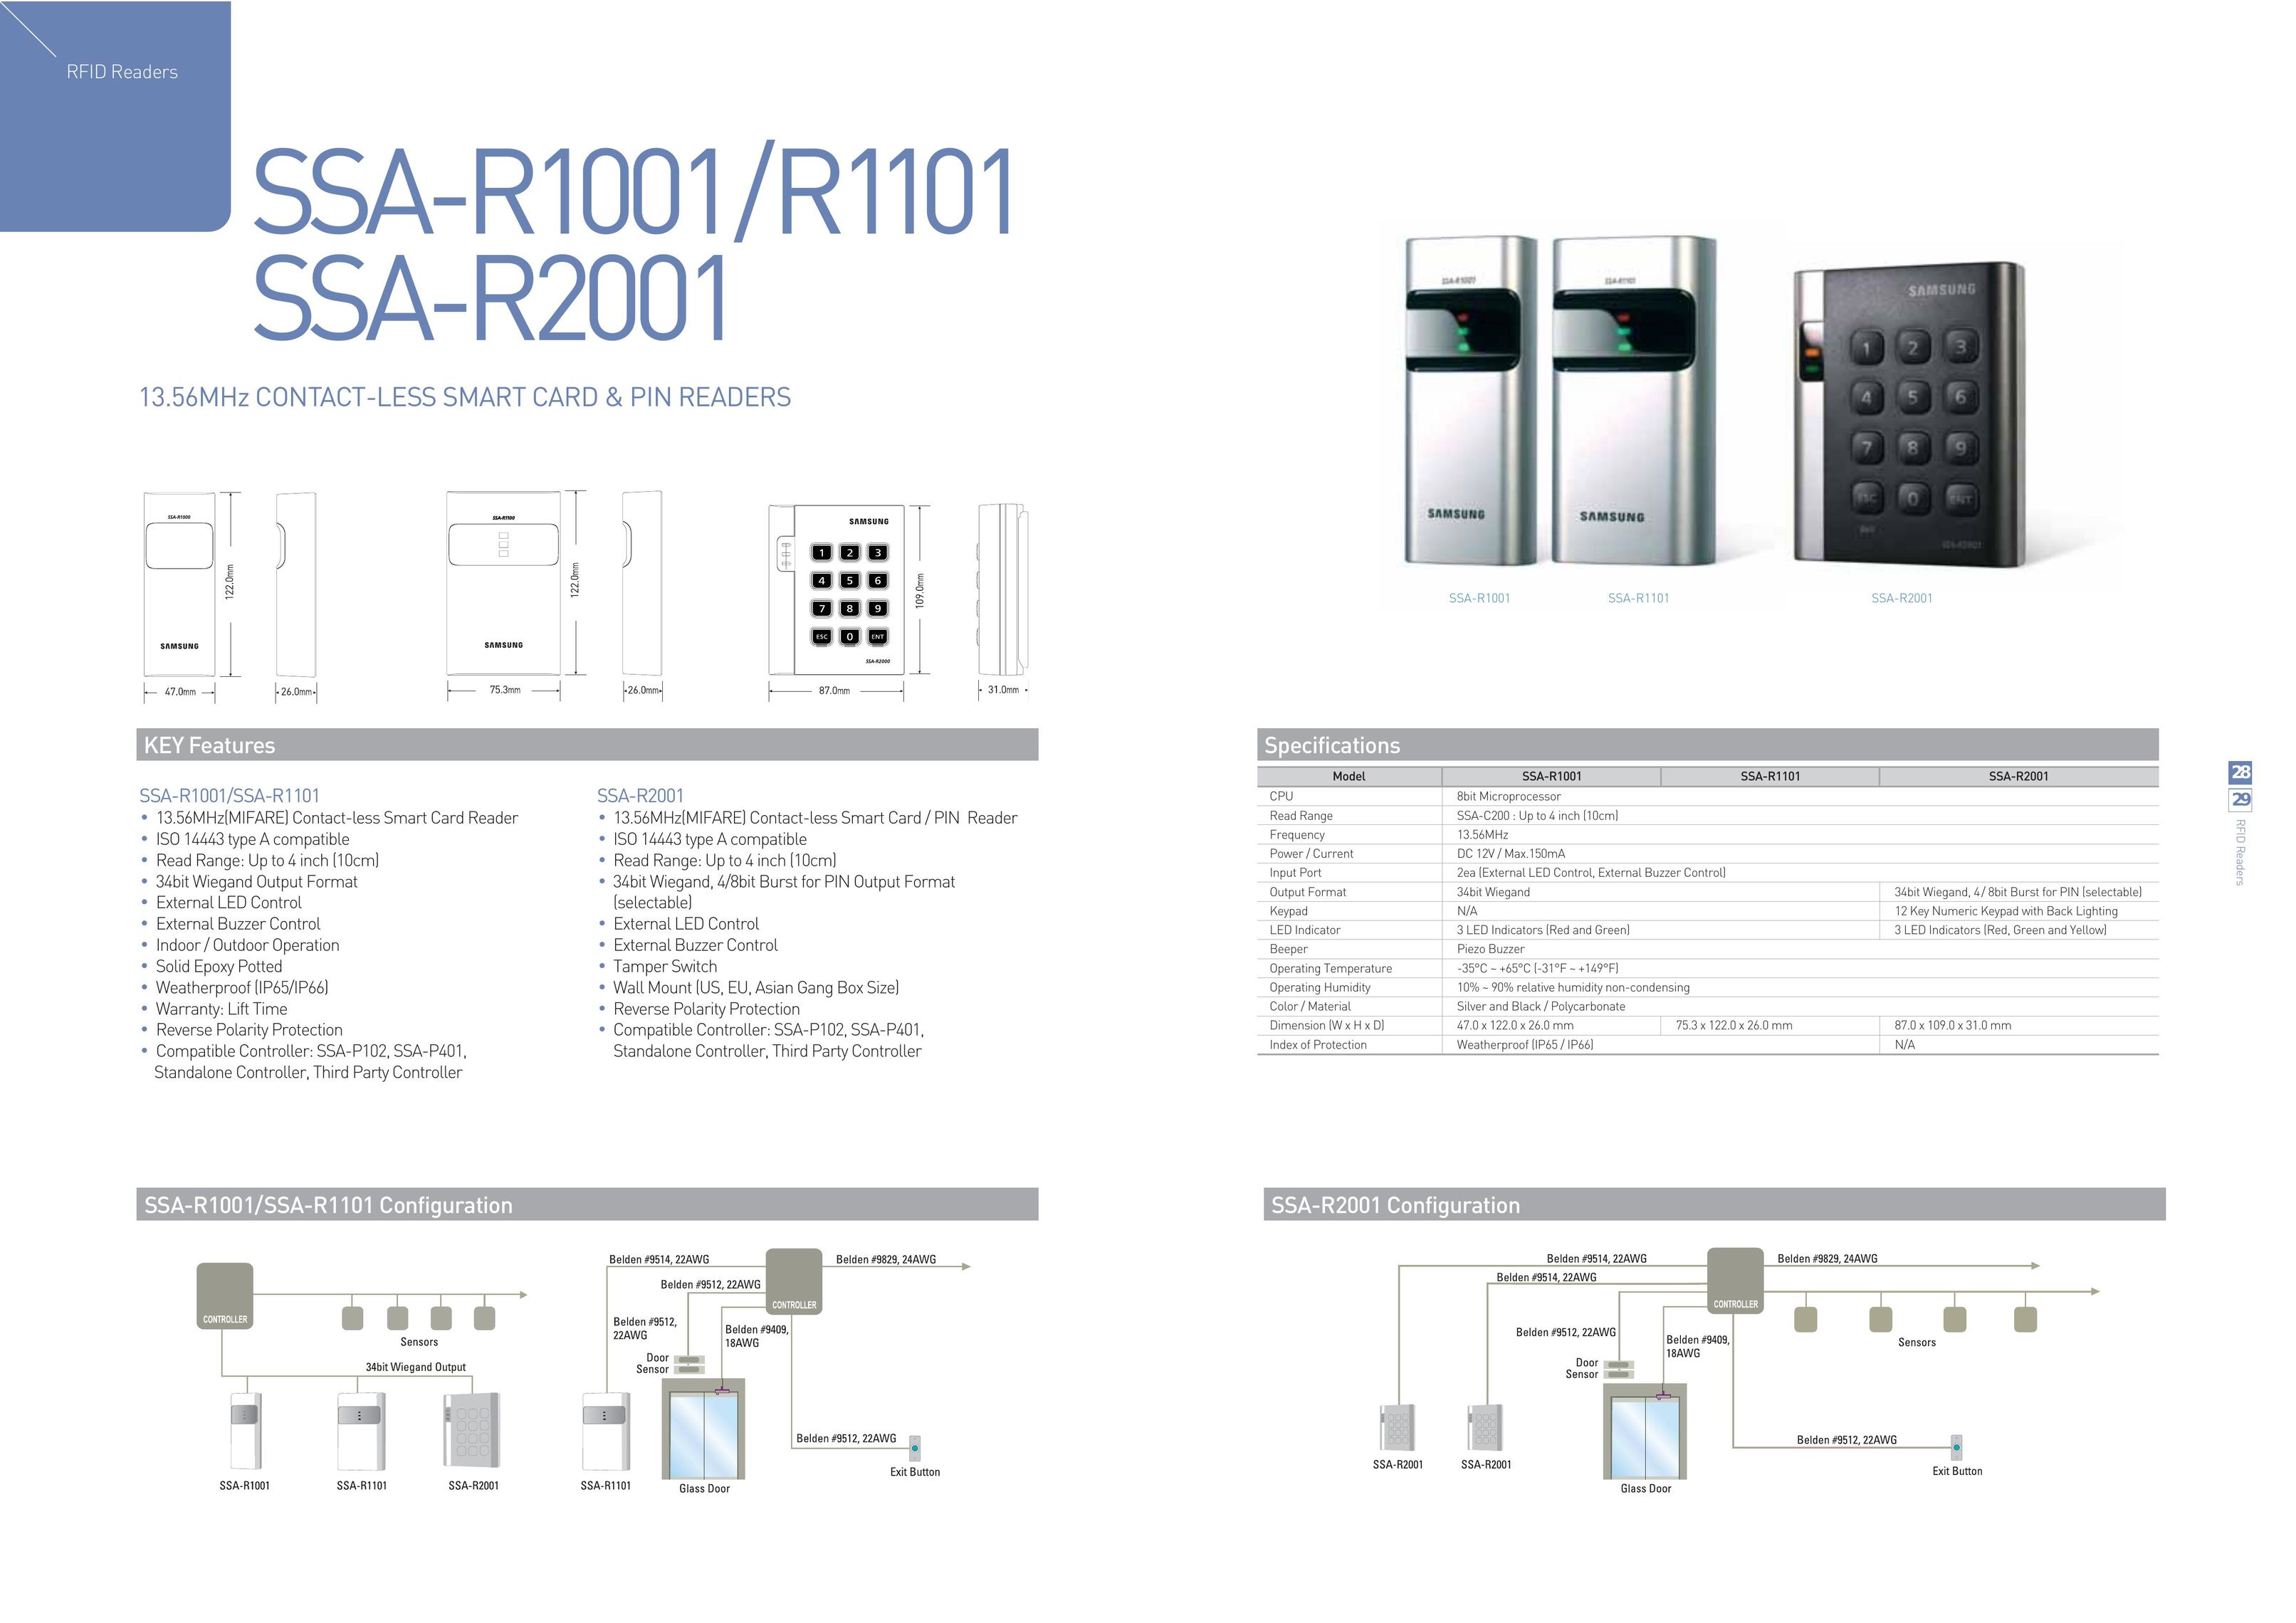 Samsung SSA-R1001 Home Security System User Manual